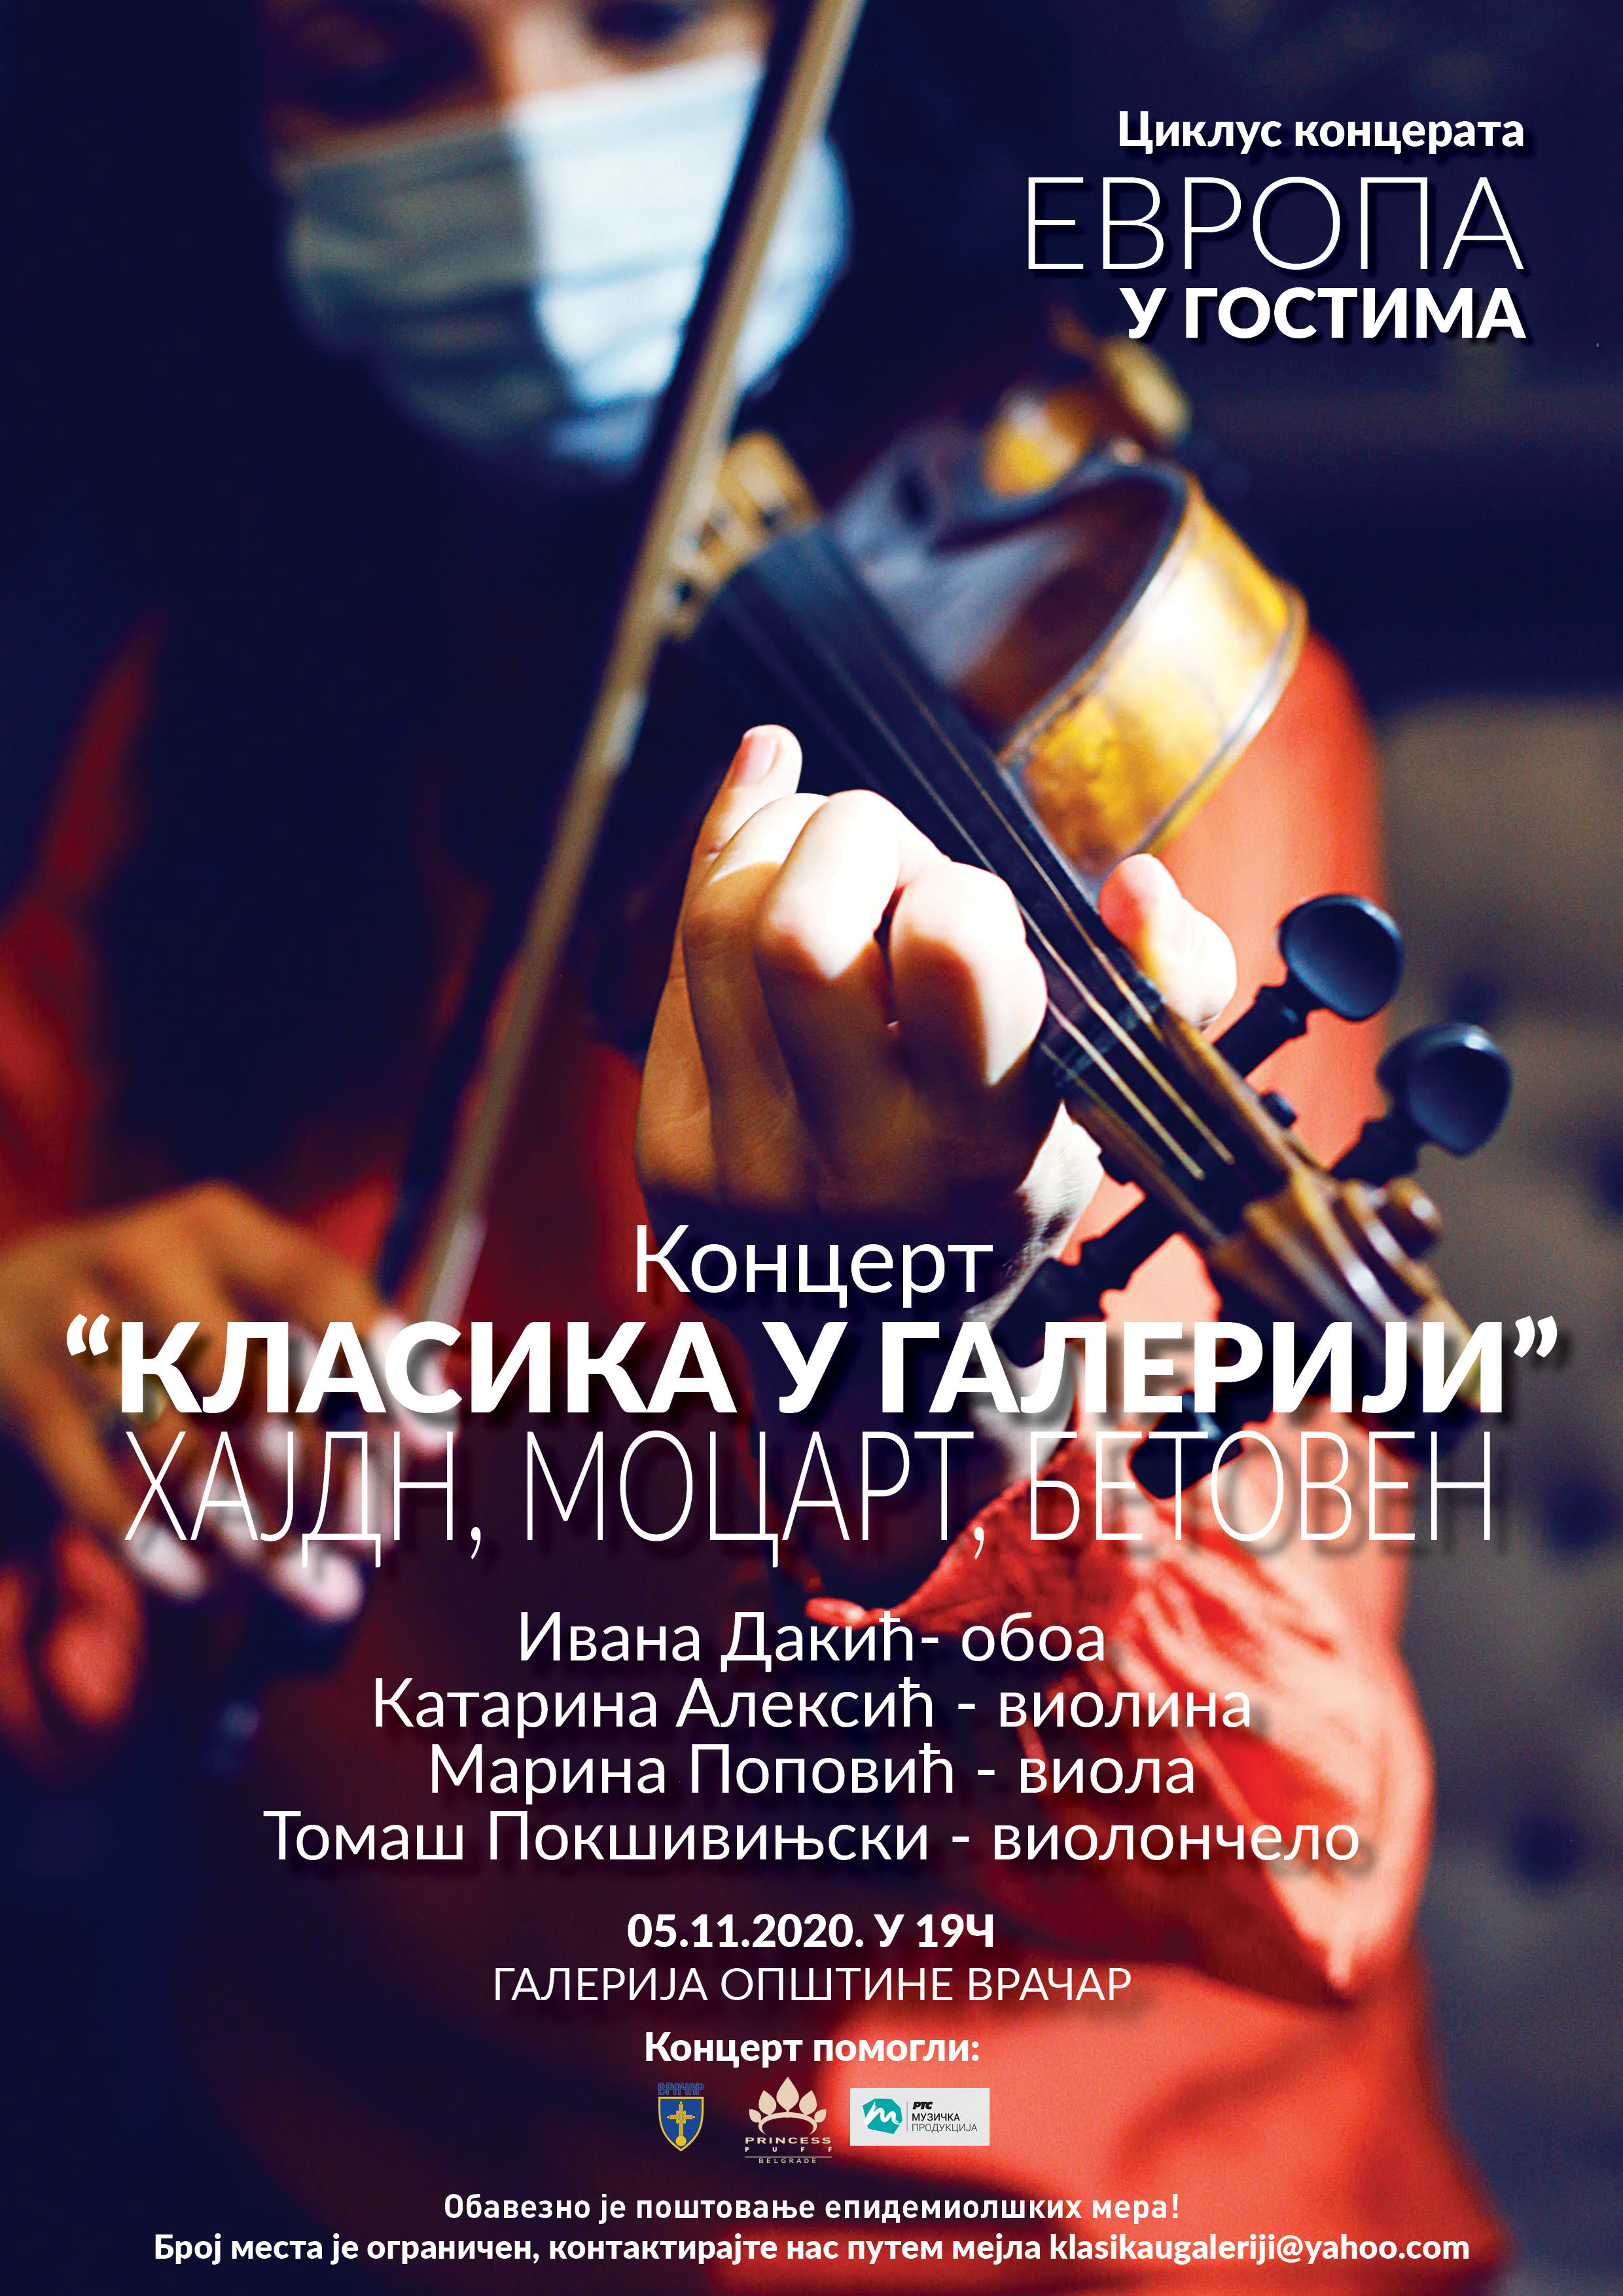 CHAMBER MUSIC OF HAYDN, MOZZARTT AND BEETHOVEN